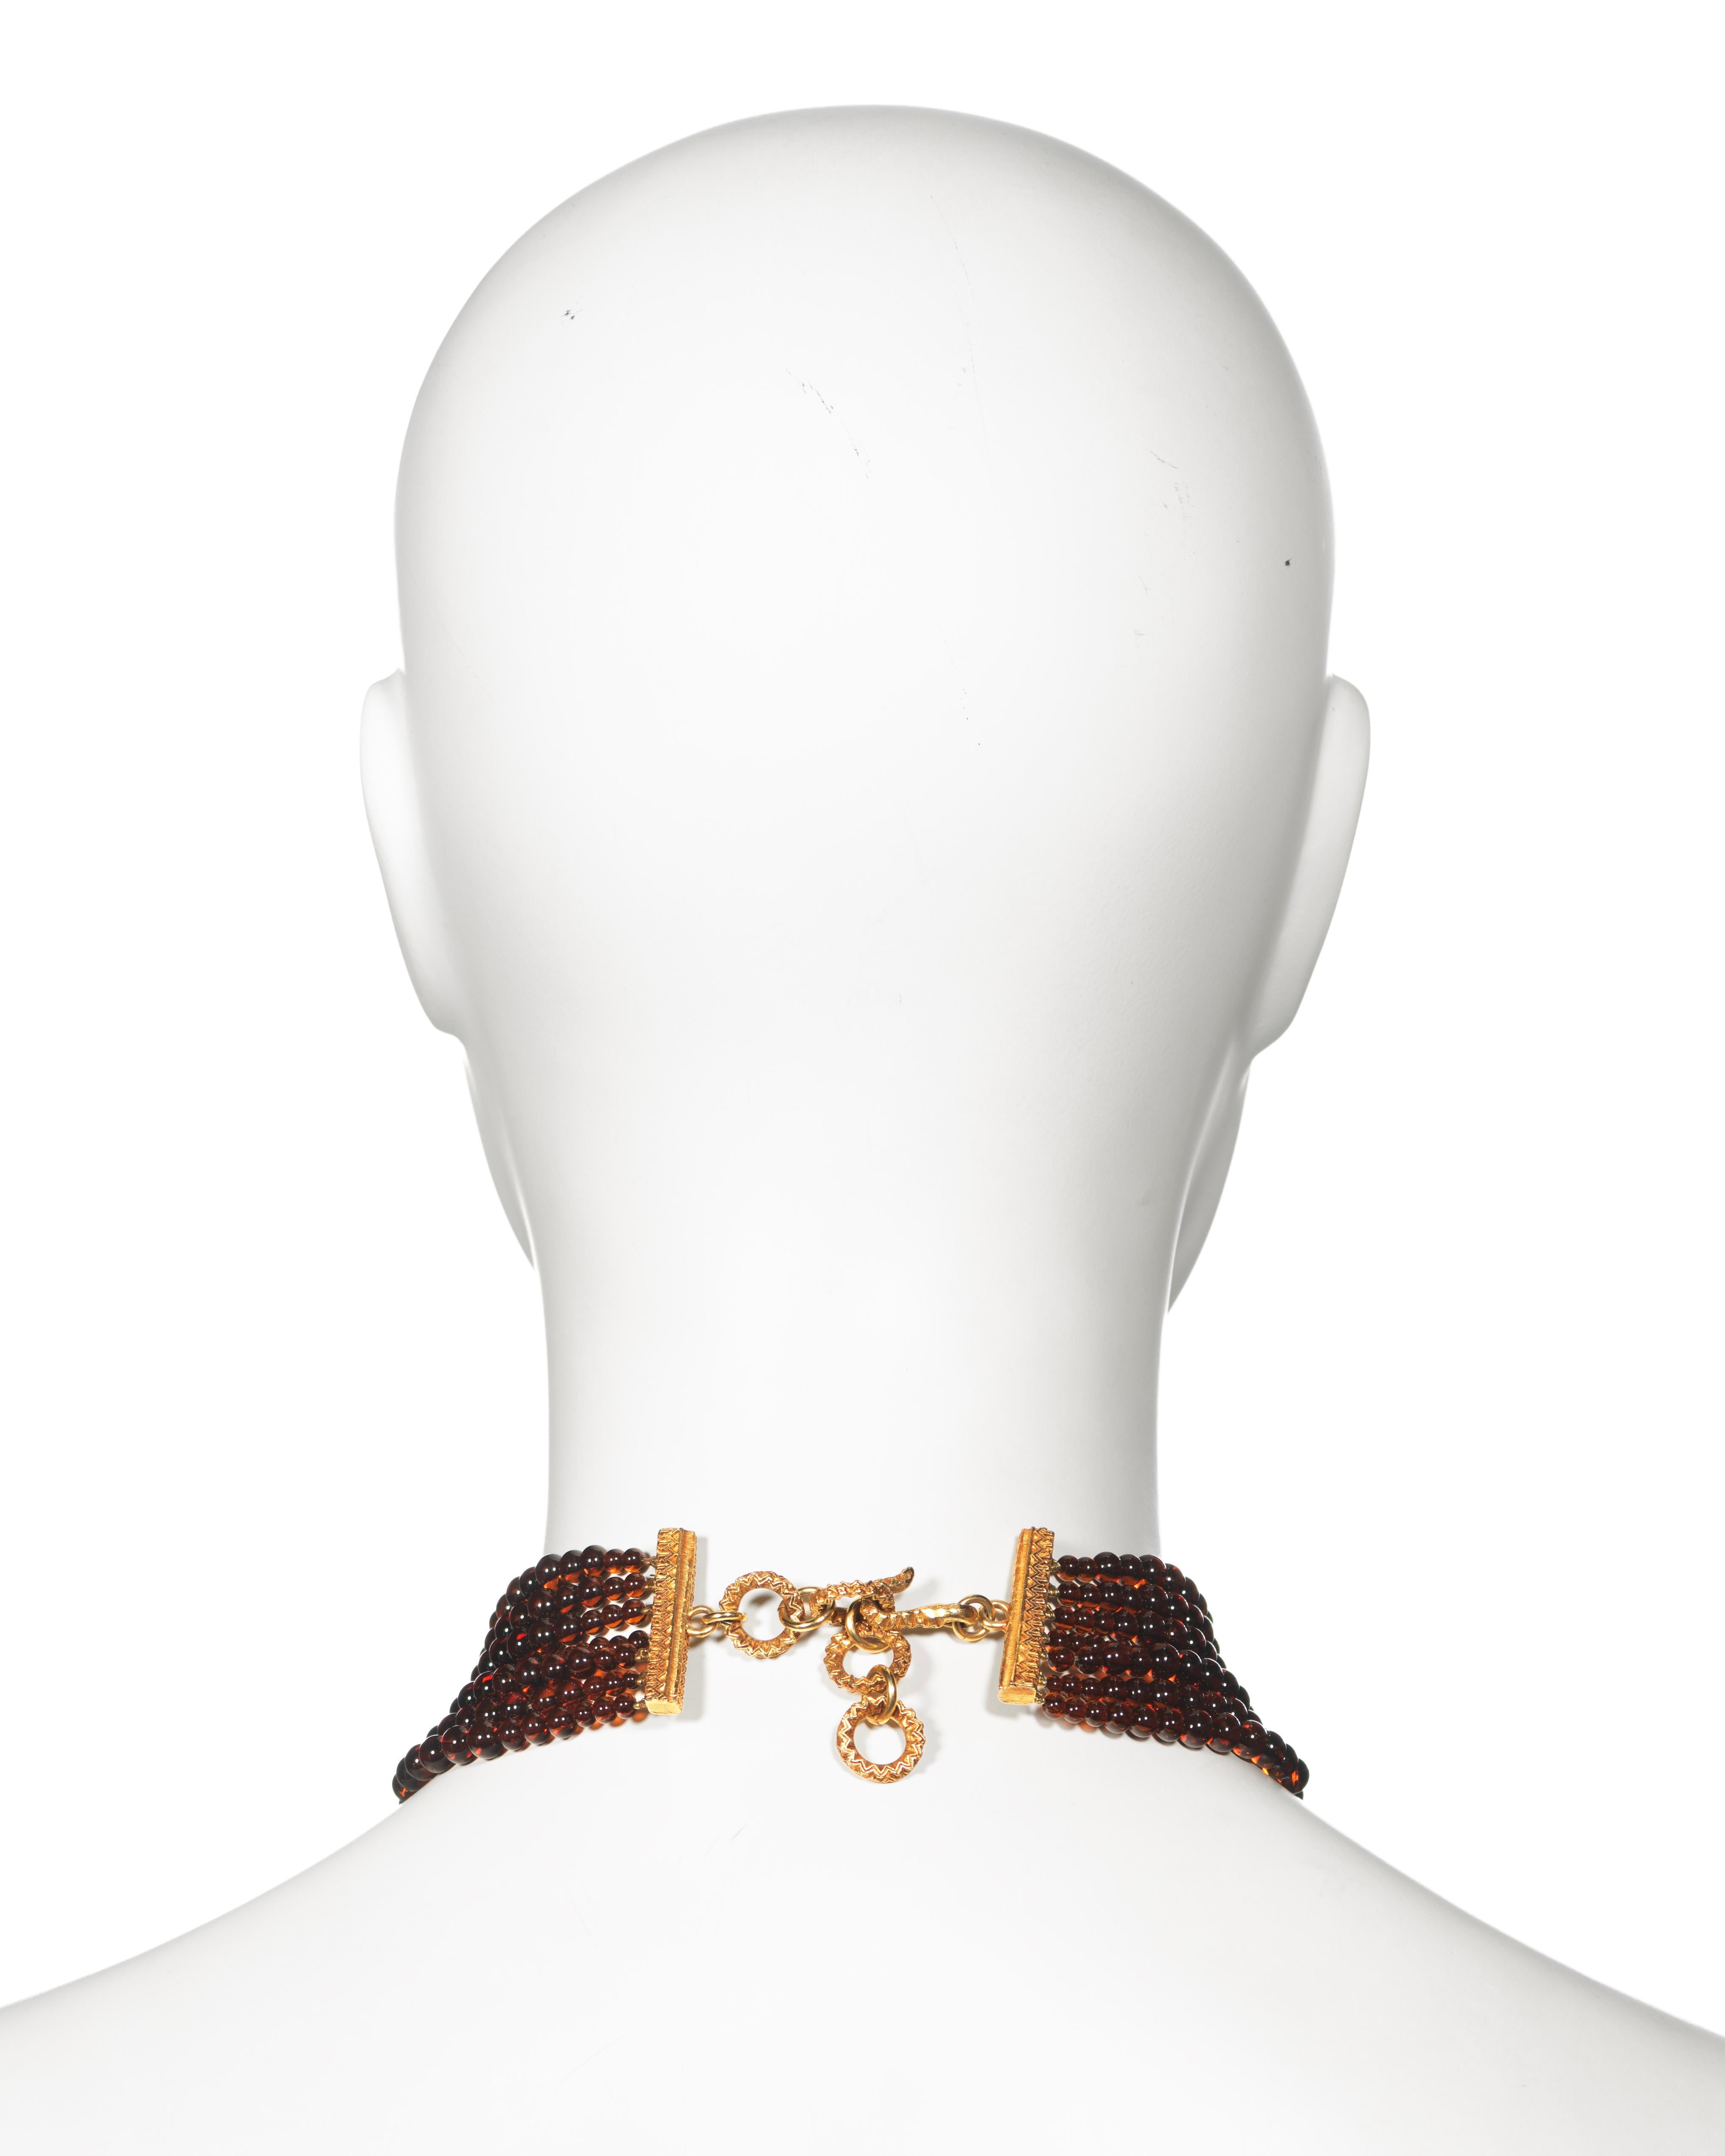 Christian Dior by John Galliano Amber Glass Bead Choker Necklace, c. 1998 For Sale 5